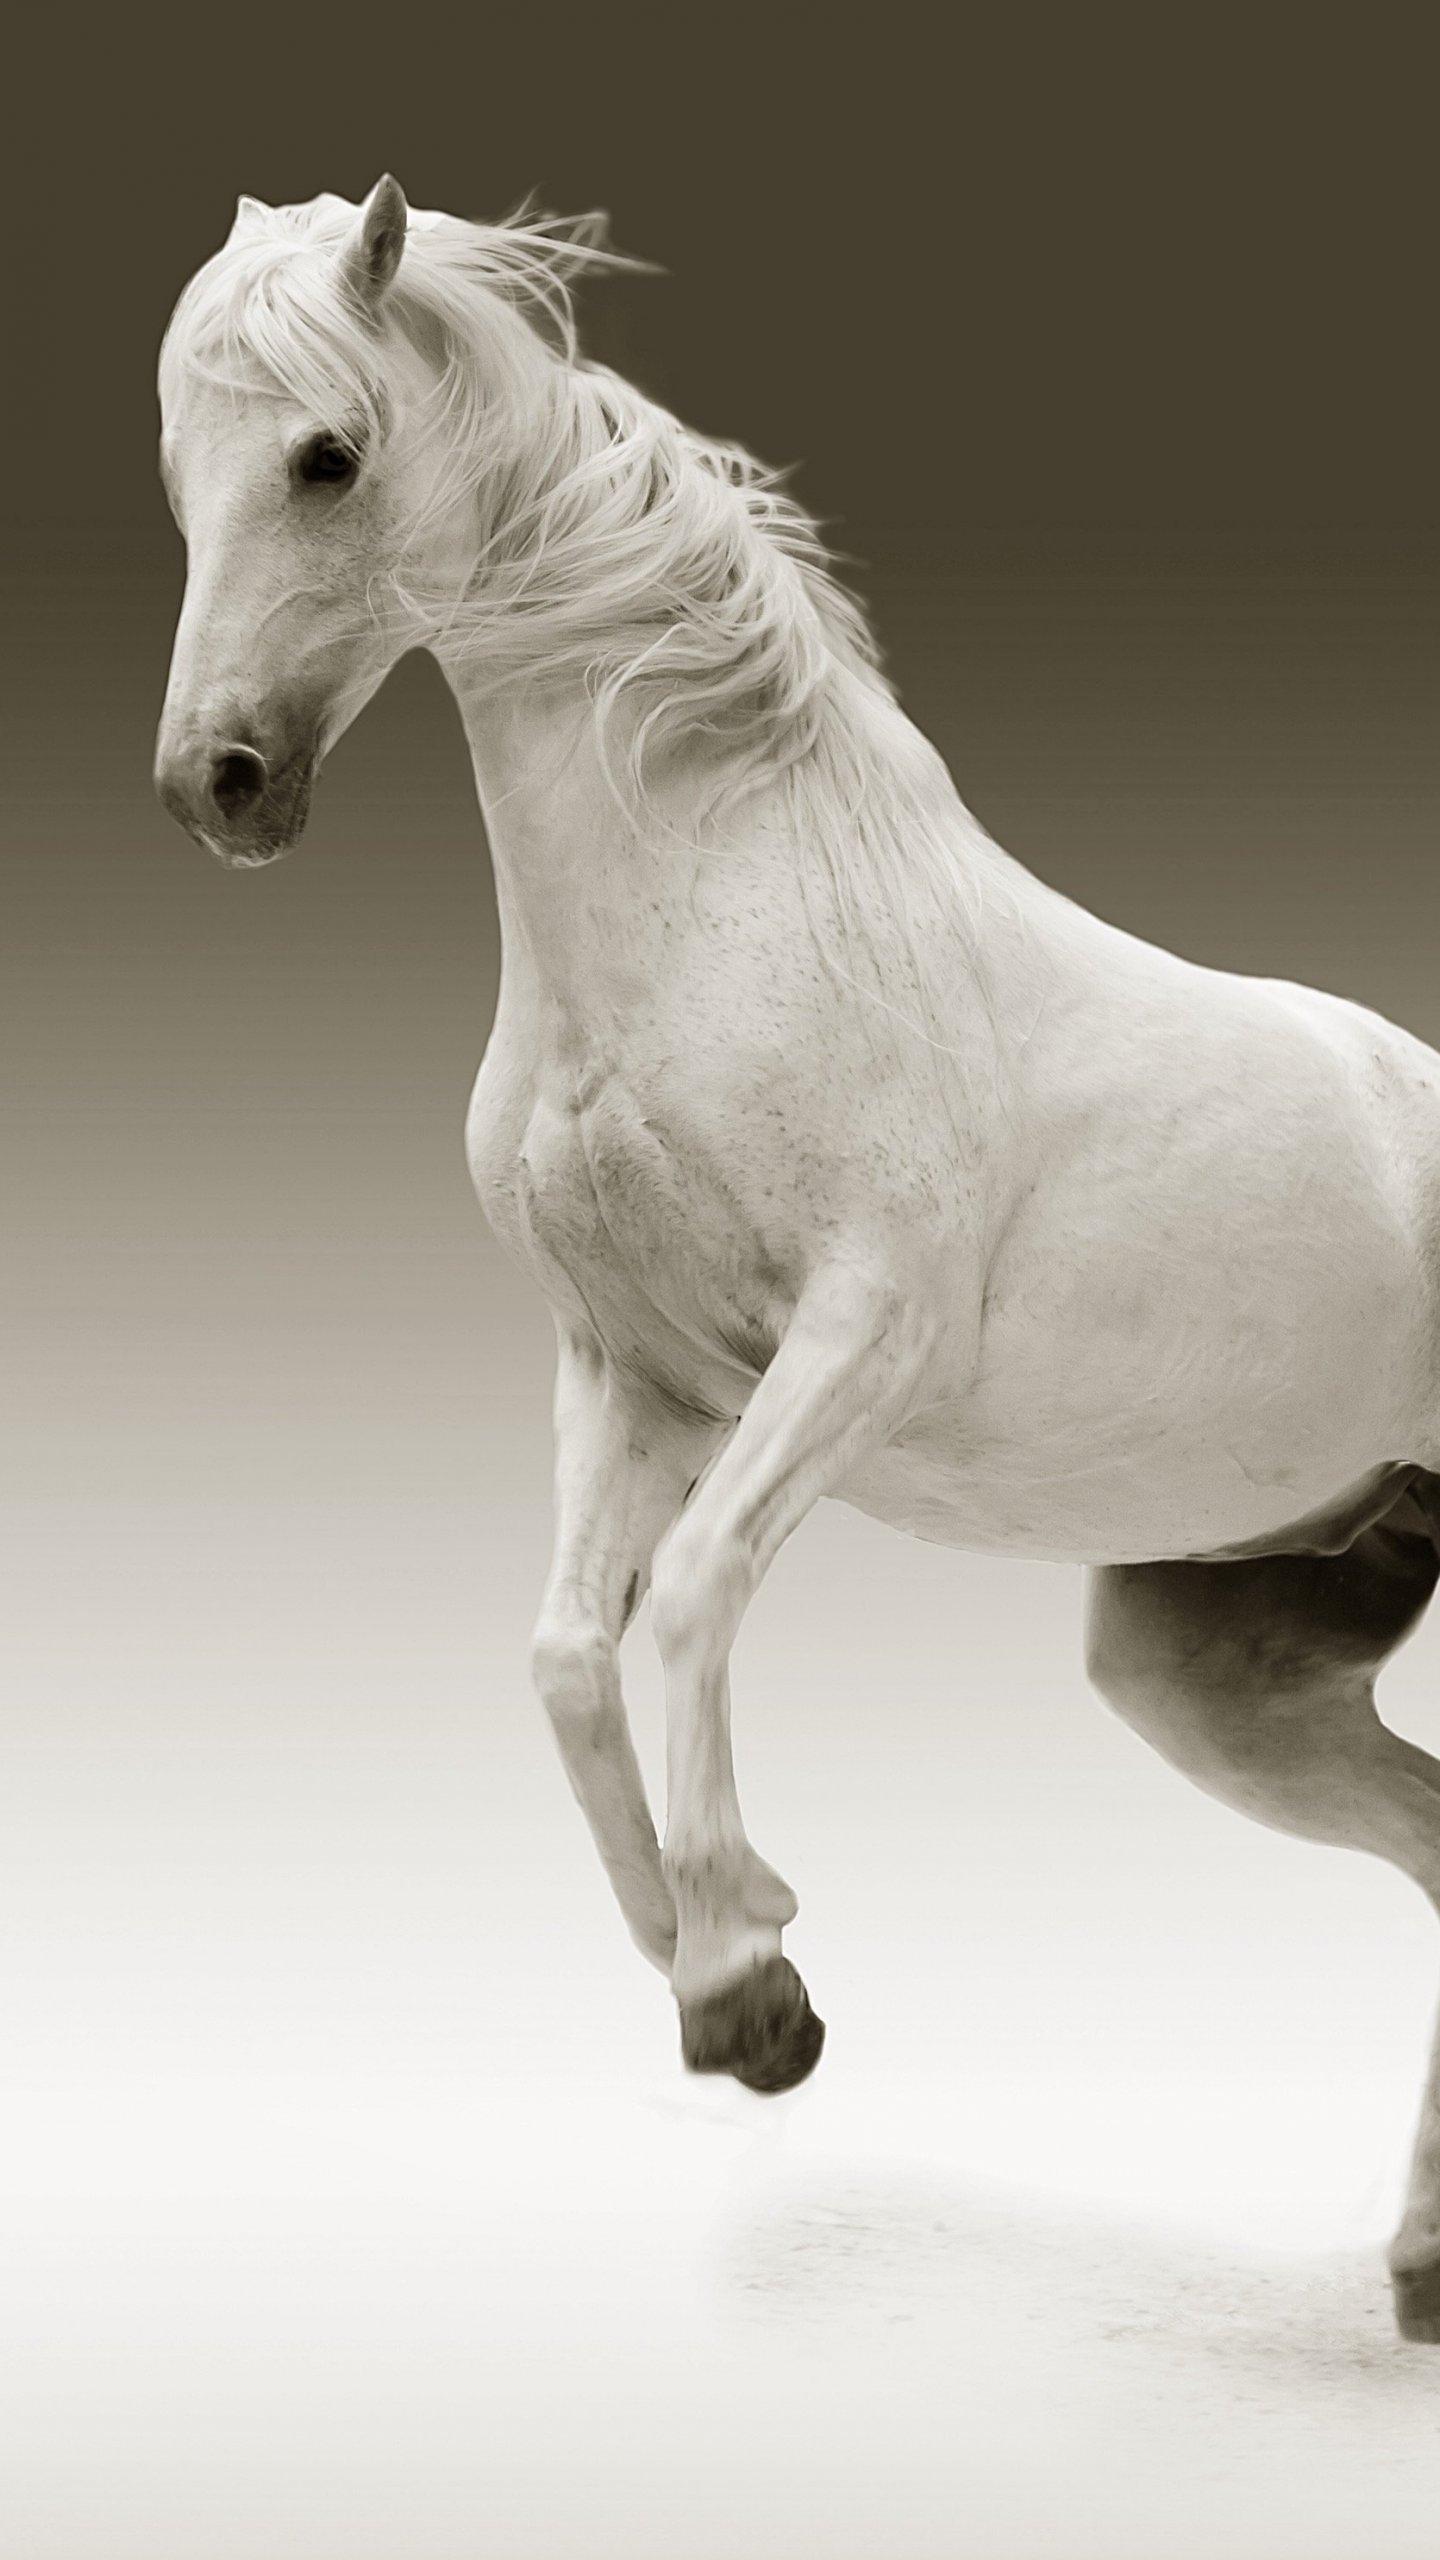 White Horse Horse Wallpaper For Mobile, Download